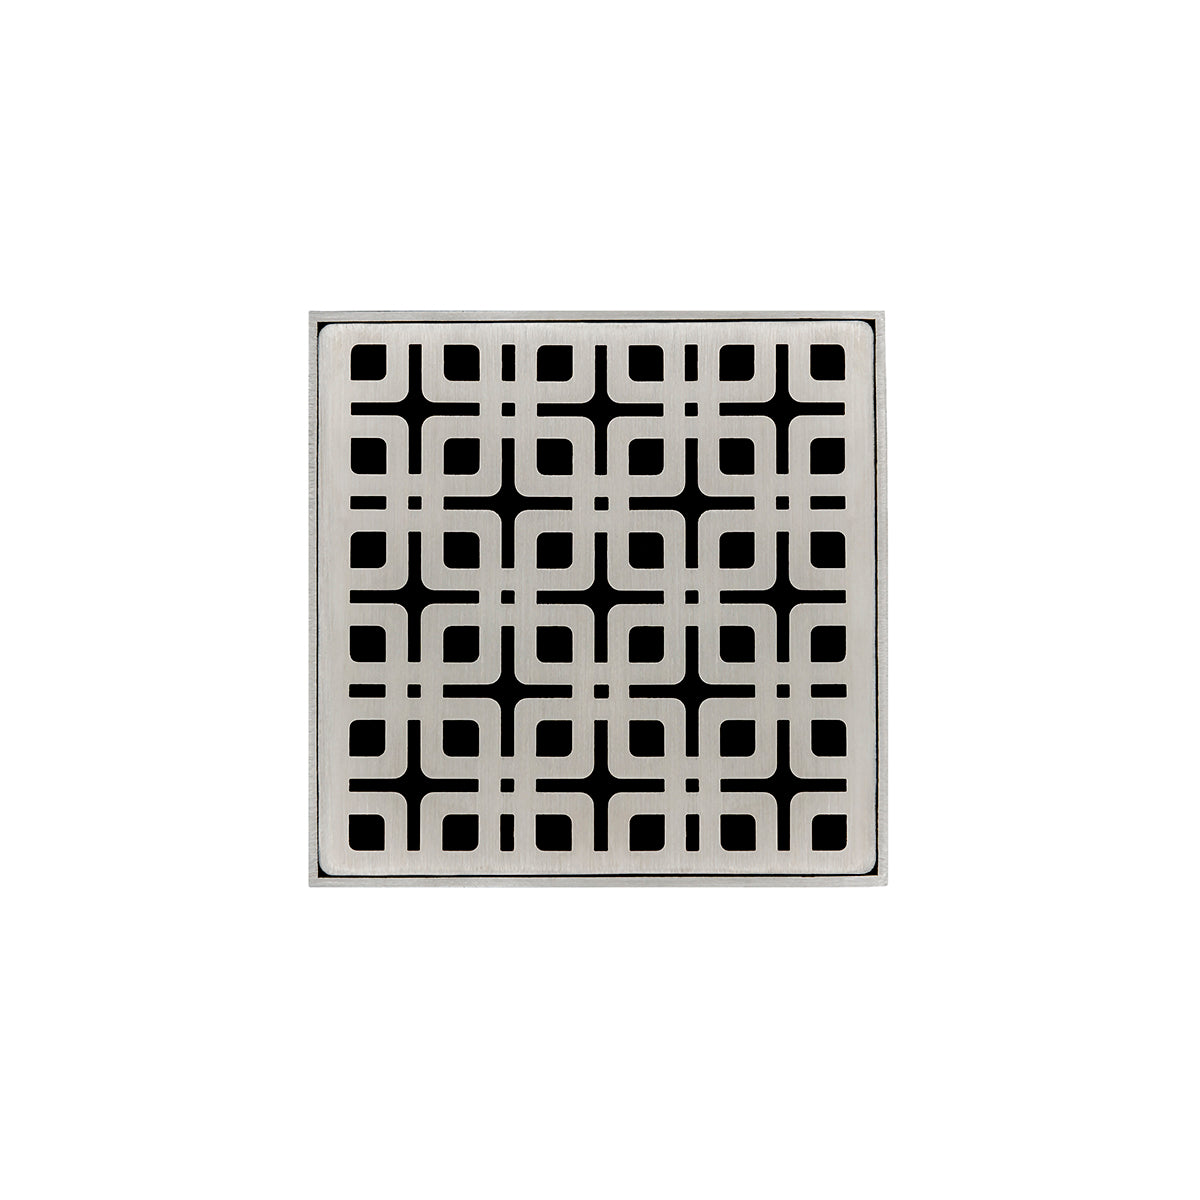 Infinity Drain 4" x 4" KDB 4 Premium Center Drain Kit with Link Pattern Decorative Plate with PVC Bonded Flange Drain Body, 2", 3" and 4" Outlet